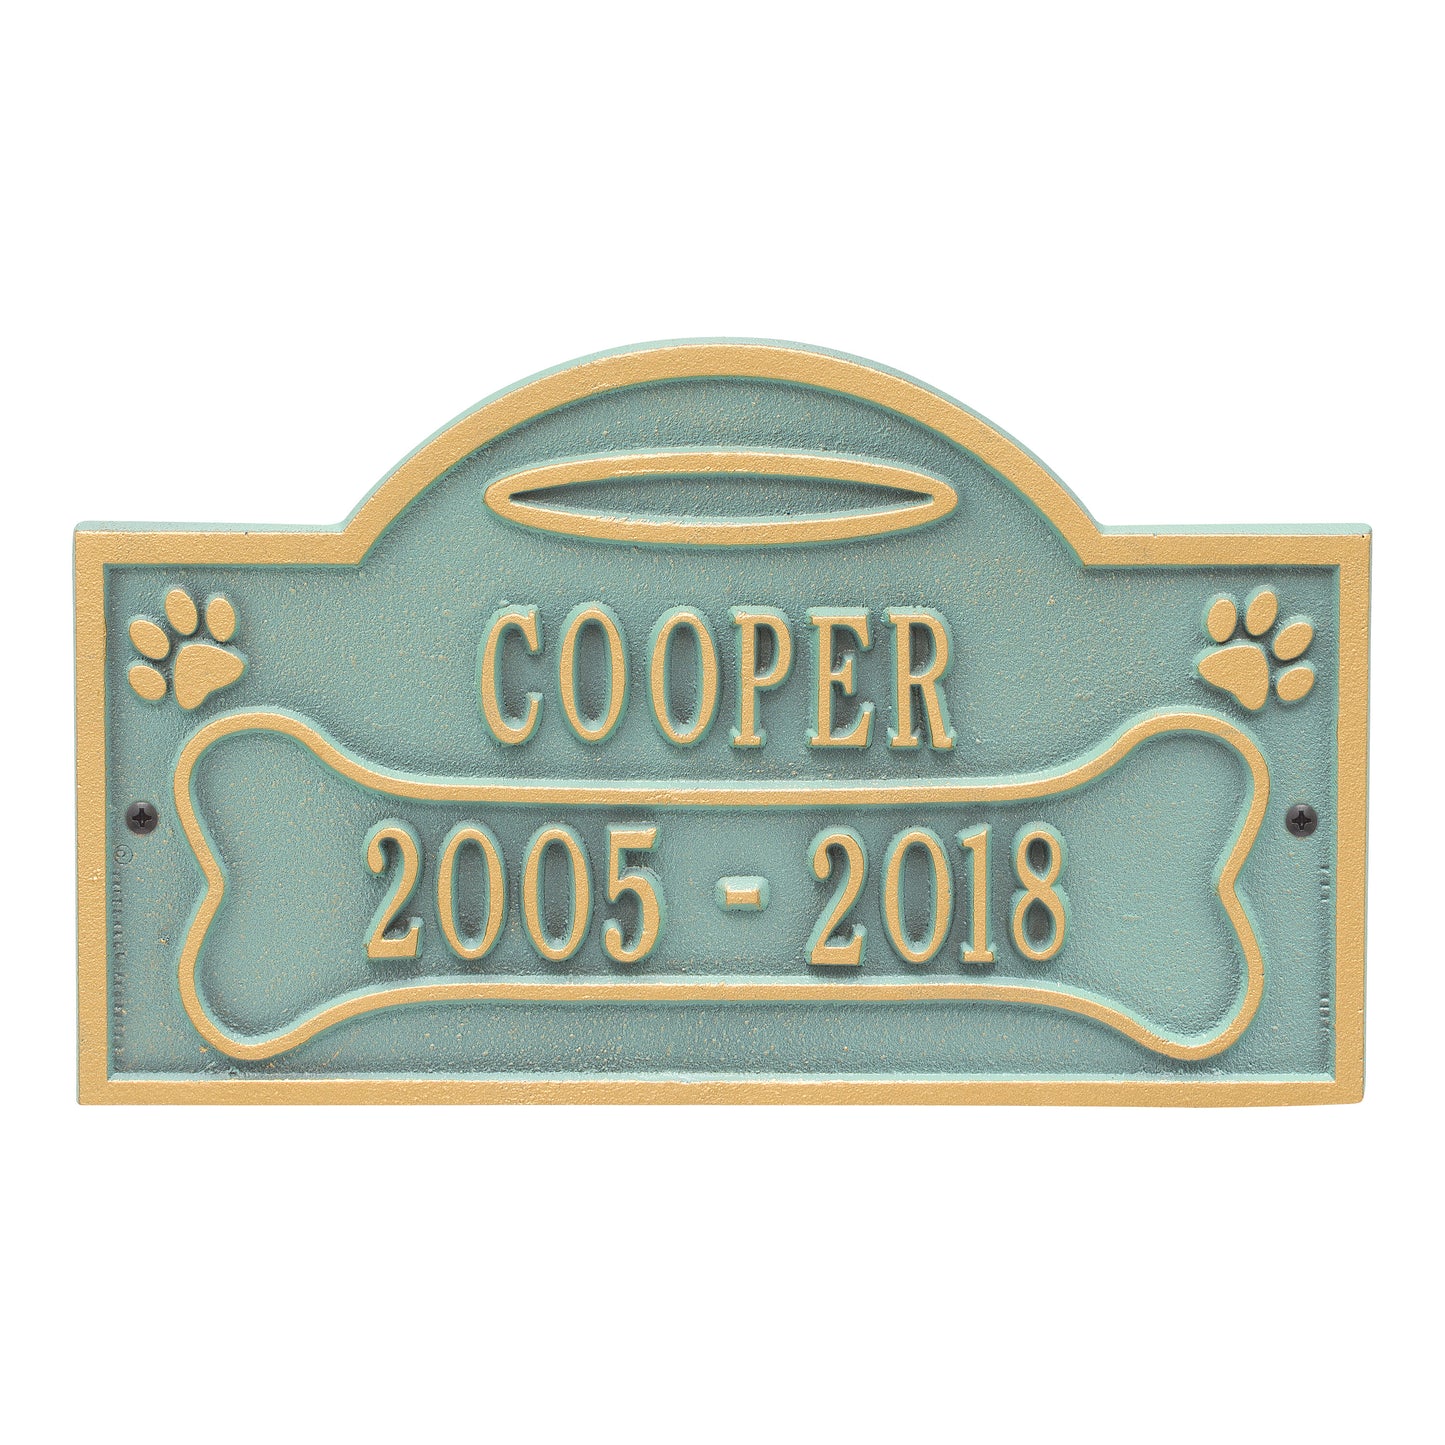 Whitehall Products All Dogs Go To Heaven Pet Memorial Personalized Wall Or Ground Plaque Two Lines White/gold